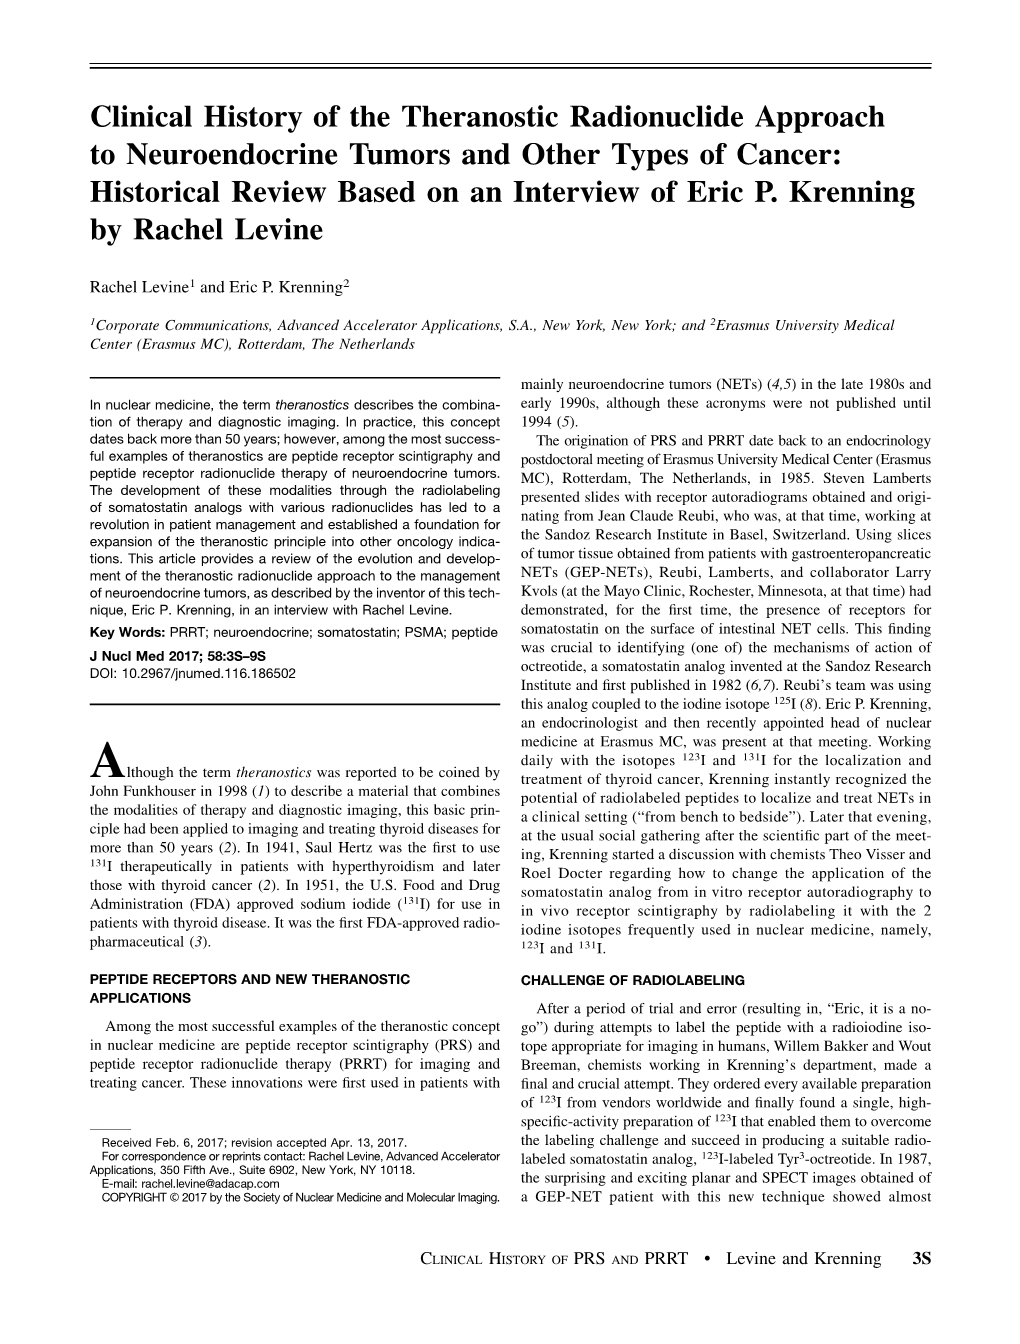 Clinical History of the Theranostic Radionuclide Approach to Neuroendocrine Tumors and Other Types of Cancer: Historical Review Based on an Interview of Eric P